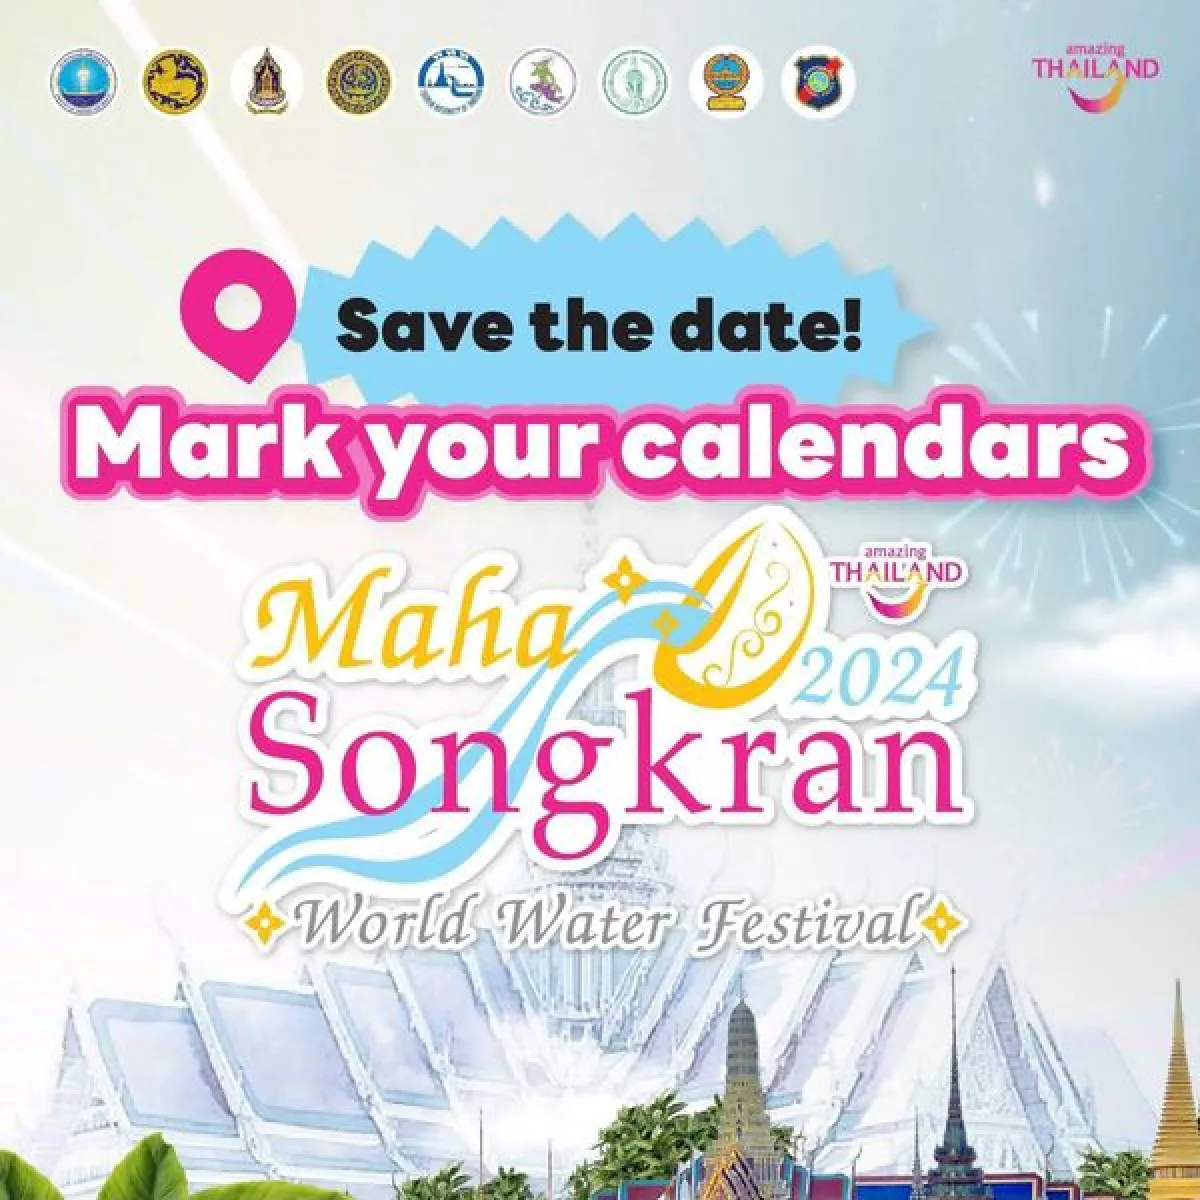 Save the Date! #EventAlert Maha Songkran World Water Festival 2024, All-Night Fun During the Great Songkran Festival 2567, April 11th - 15th, 2567, at Ratchadamnoen Avenue and Sanam Luang, Bangkok. This event is going to be spectacular, so tag your friend